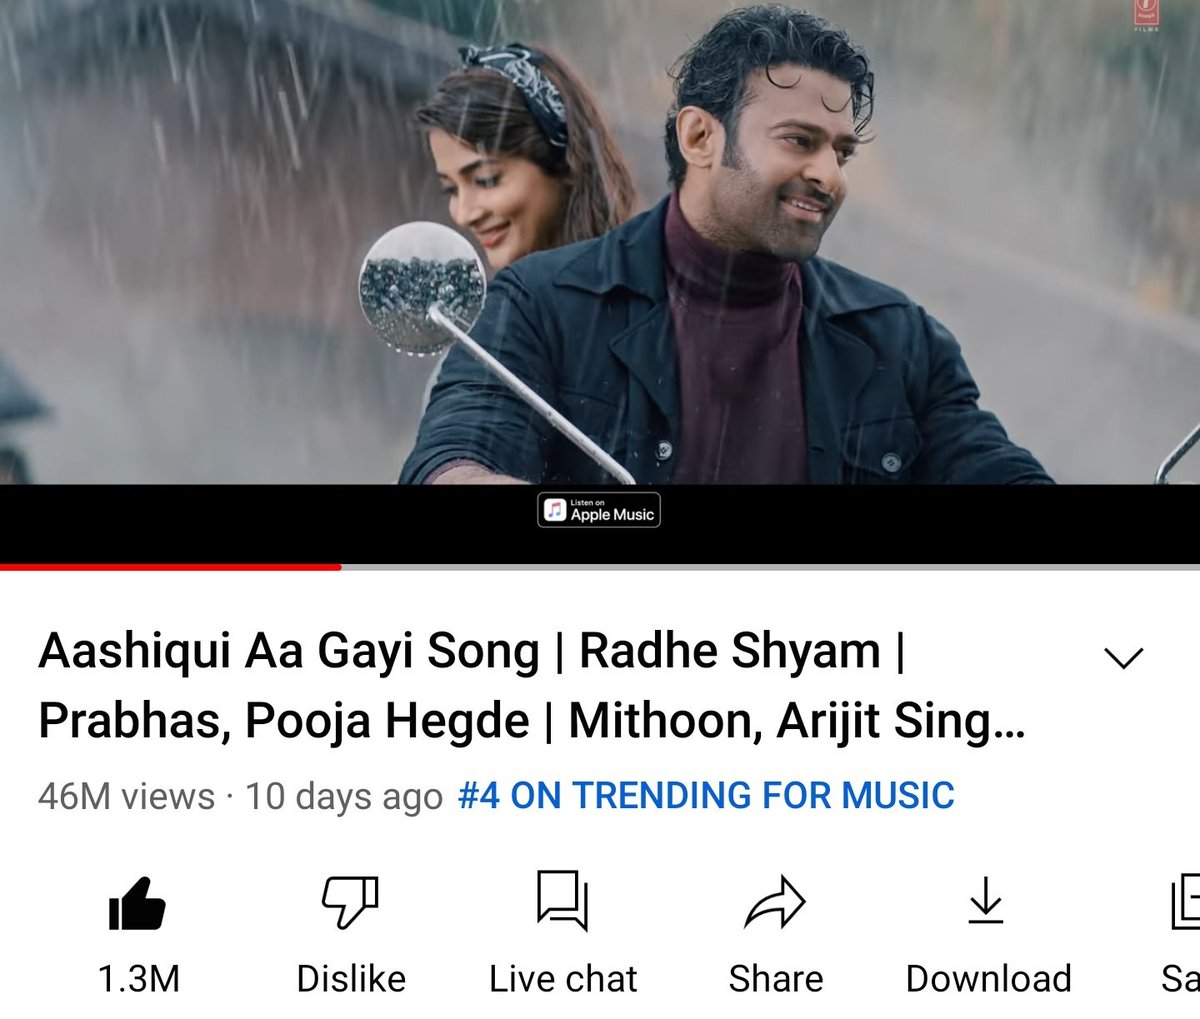 #aashiquiaagayi Reached 46 million views with 1.3 million likes.Mostly 50 million views by tomorrow...Faster than #PyschoSaiyaan 🔥🔥